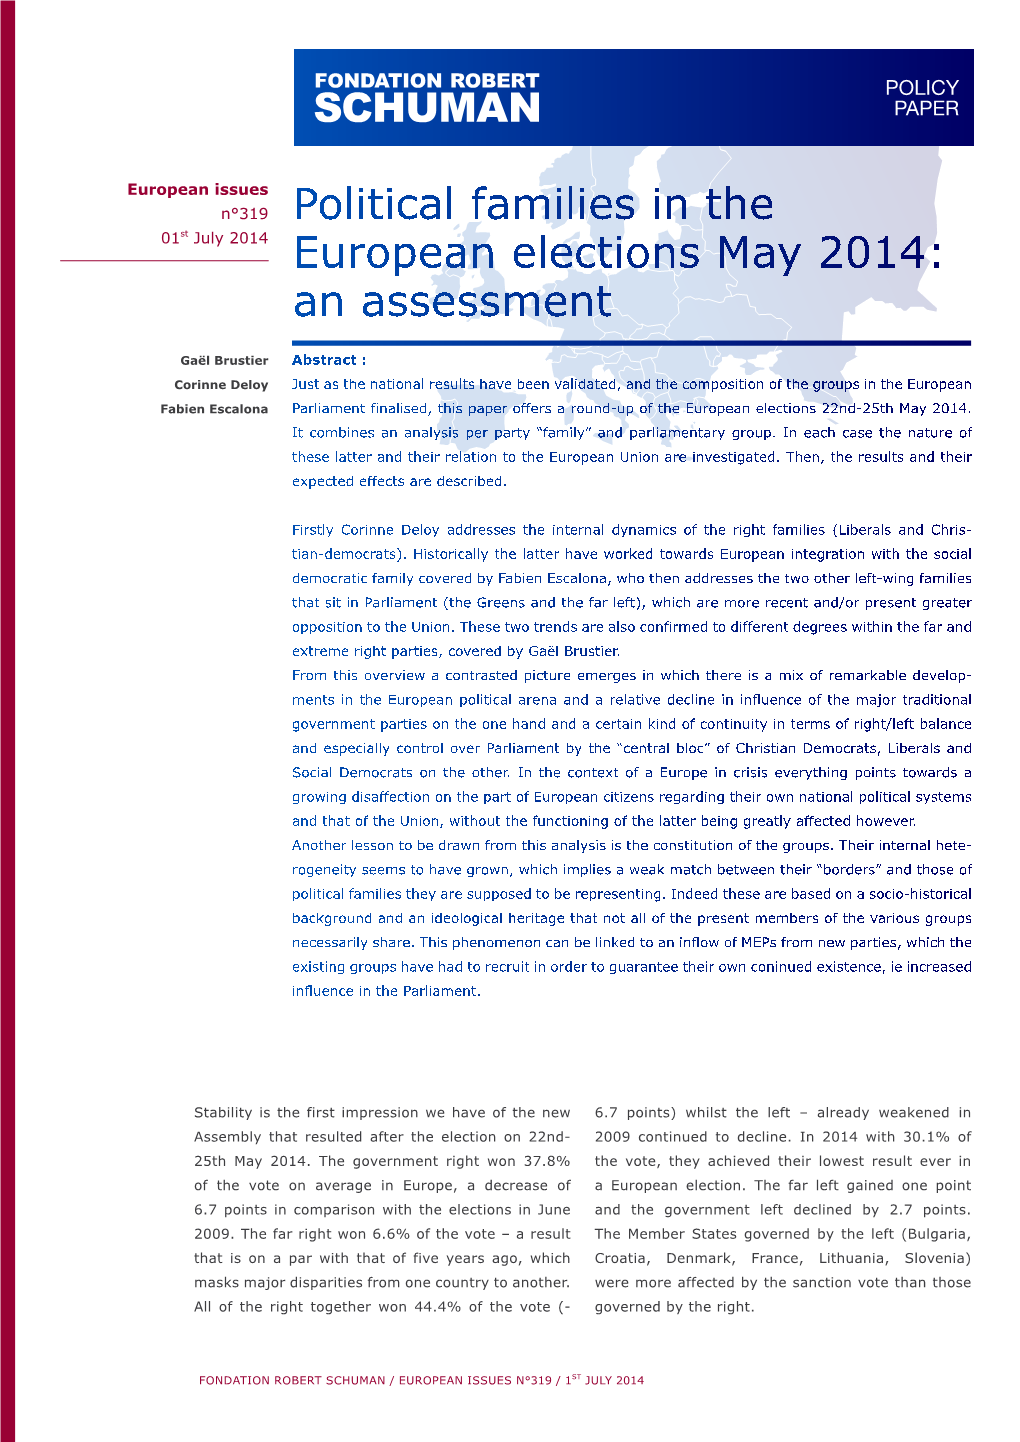 Political Families in the European Elections May 2014: an Assessment